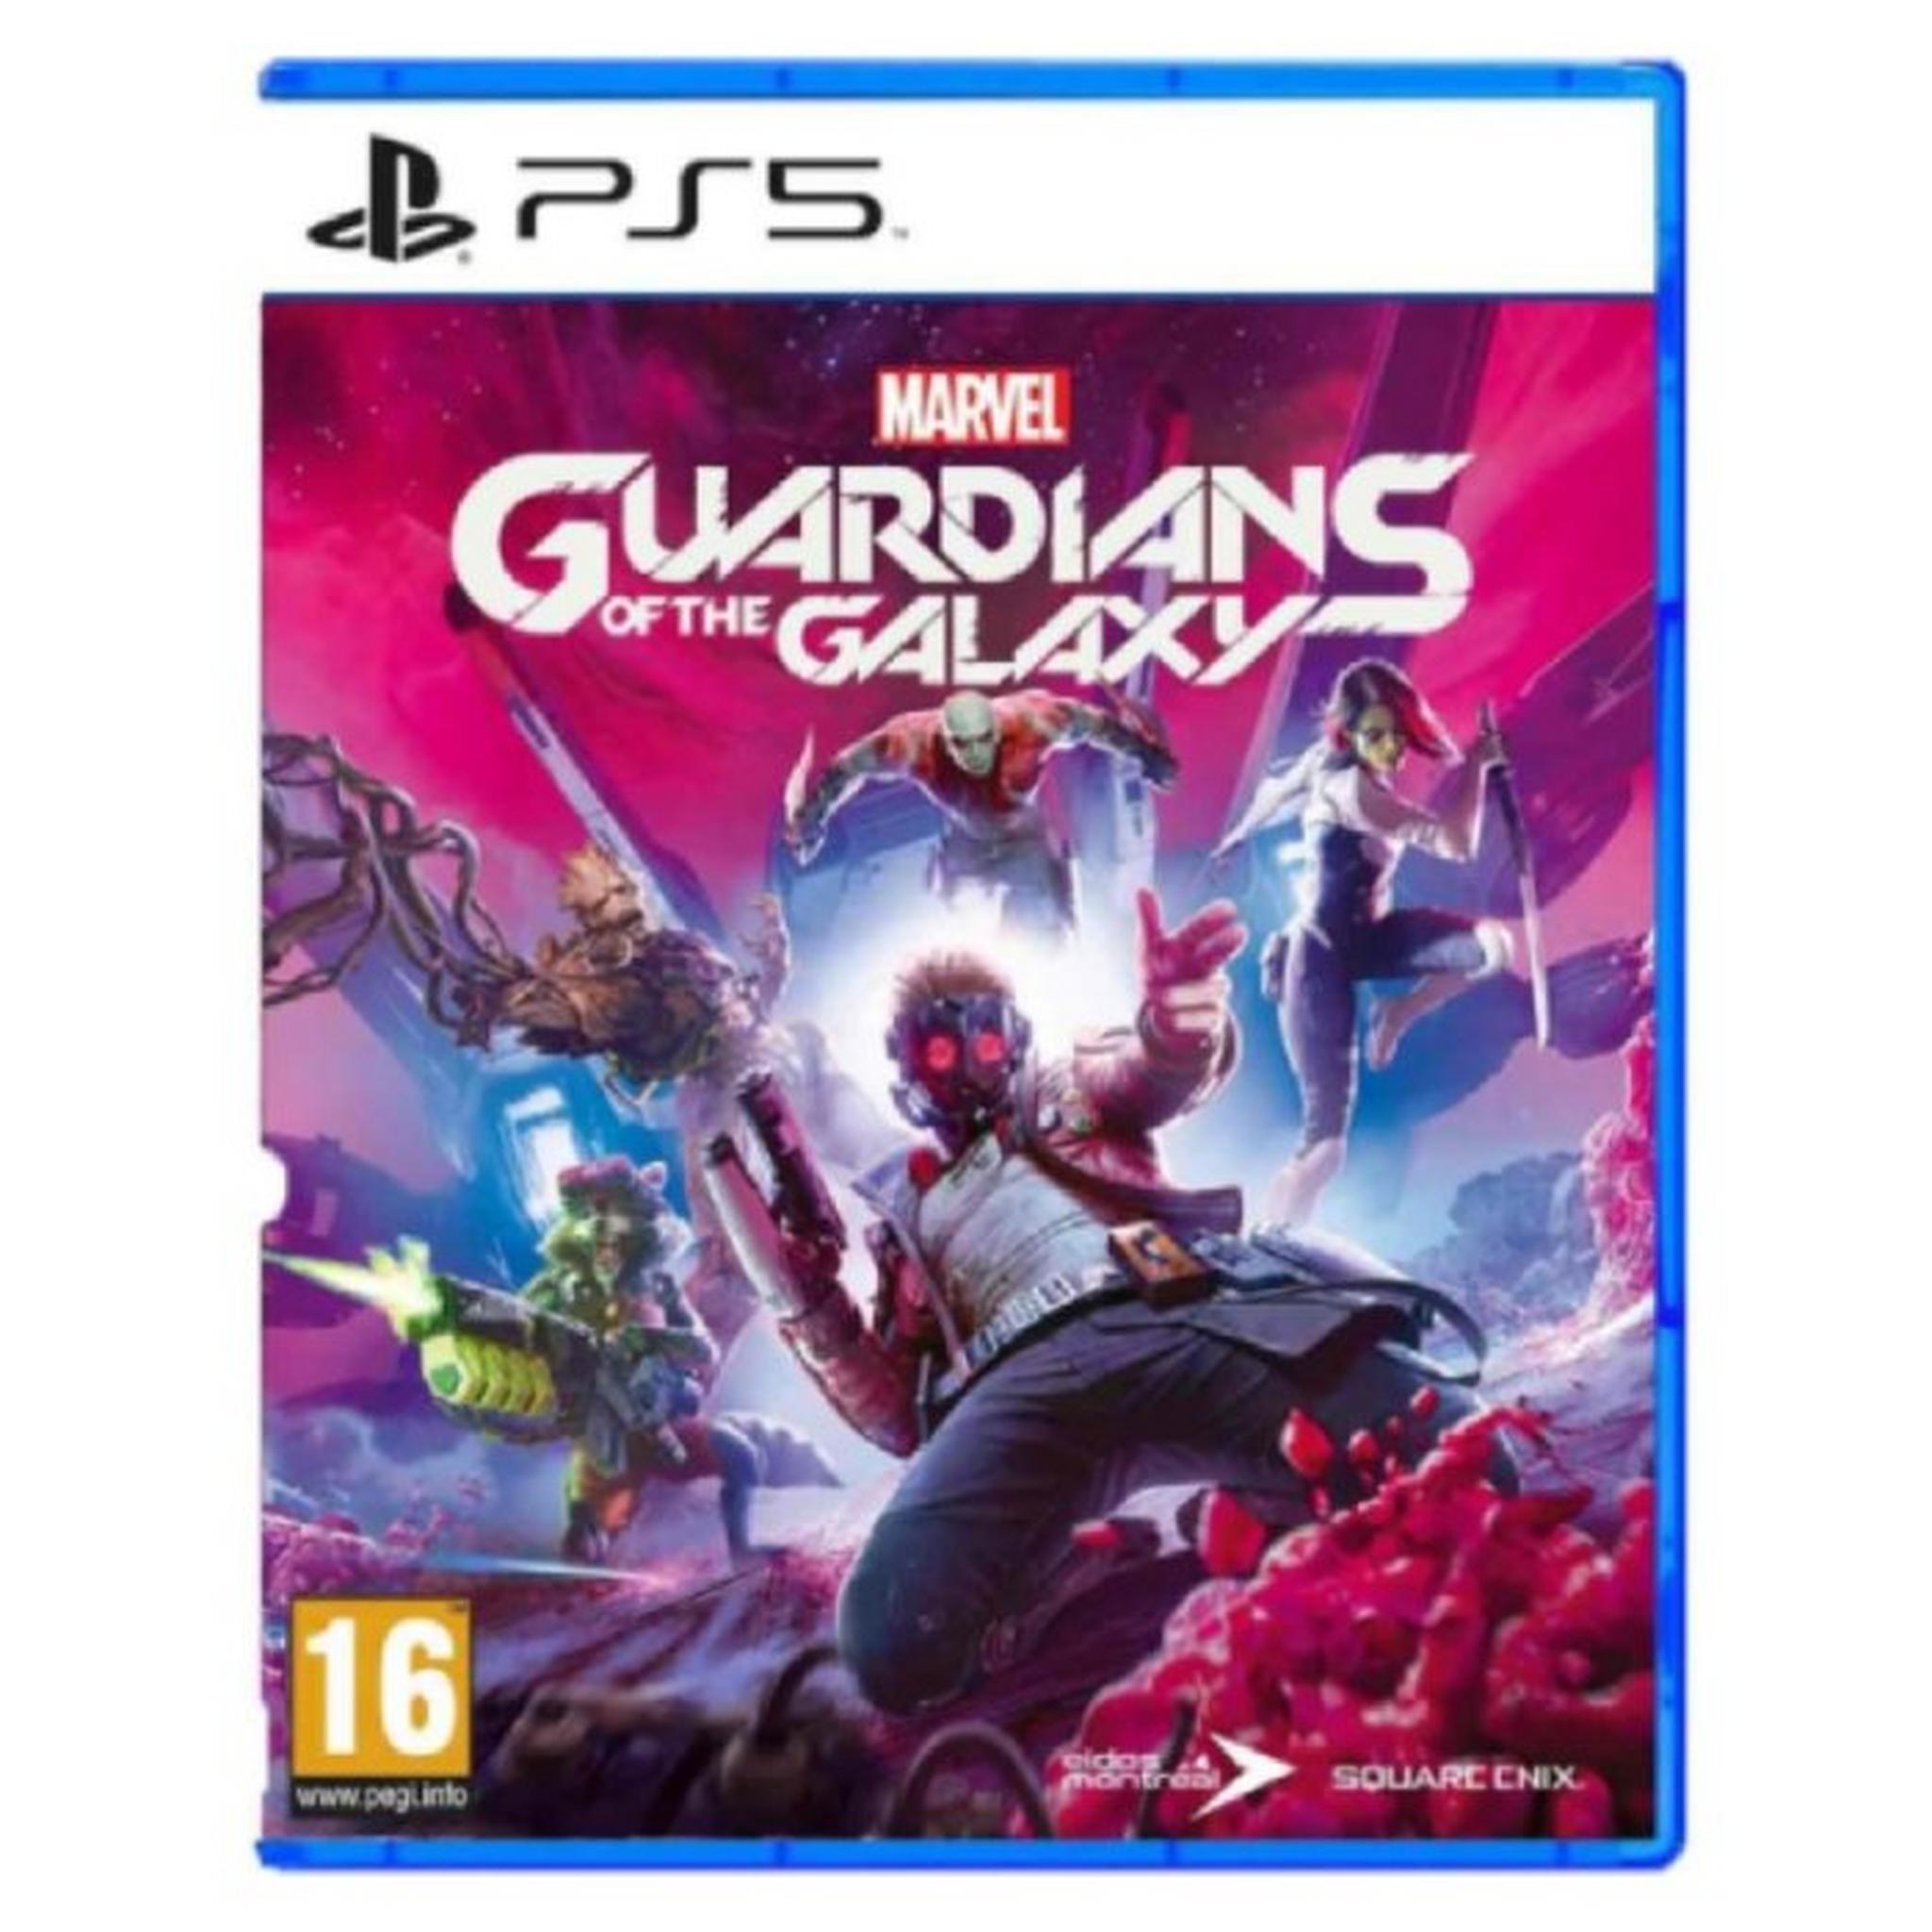 Marvel's Guardians of the Galaxy - Standard Edition - Day 1 - PS5 Game